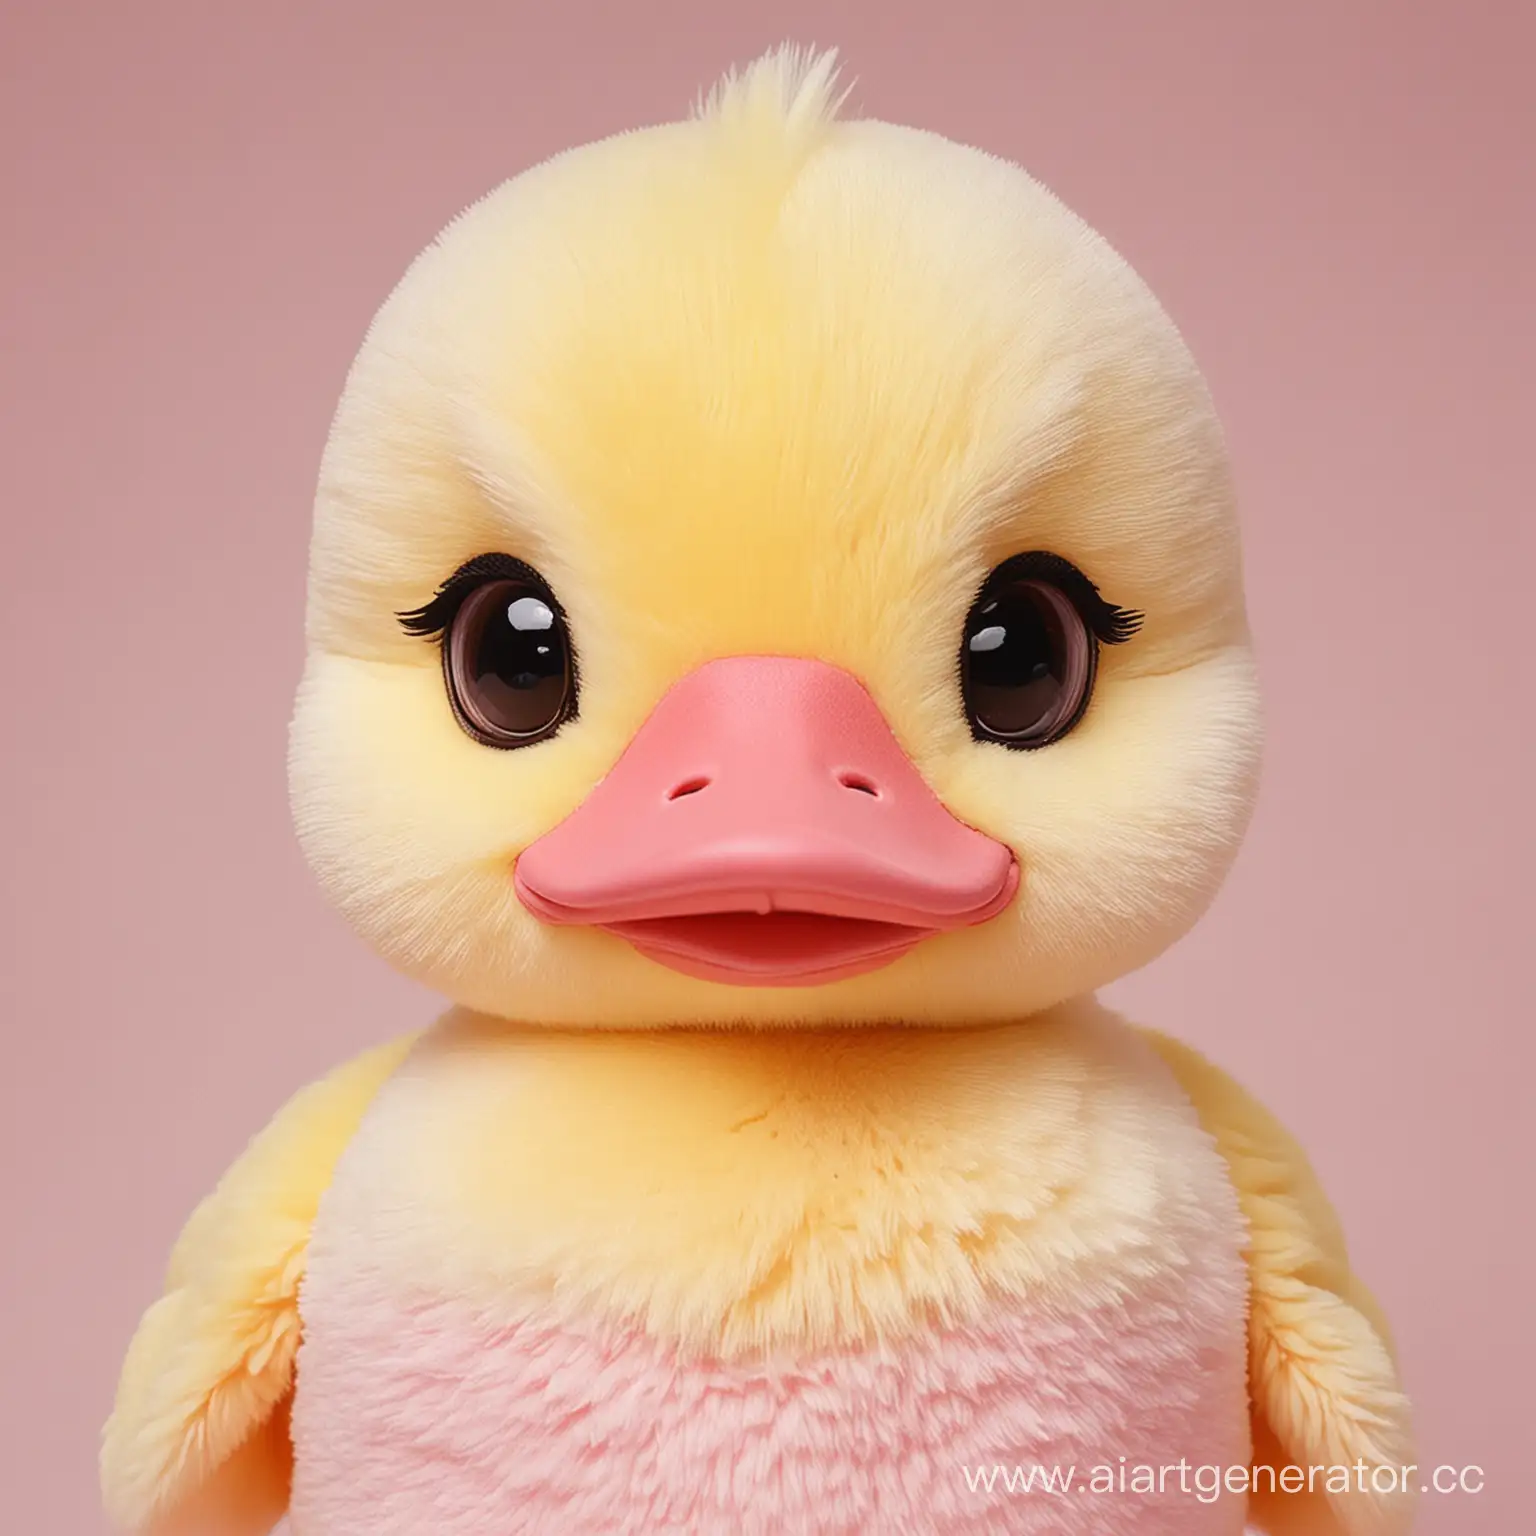 Kawaii-Plush-Duckling-with-Humanoid-Features-and-Vibrant-Color-Scheme